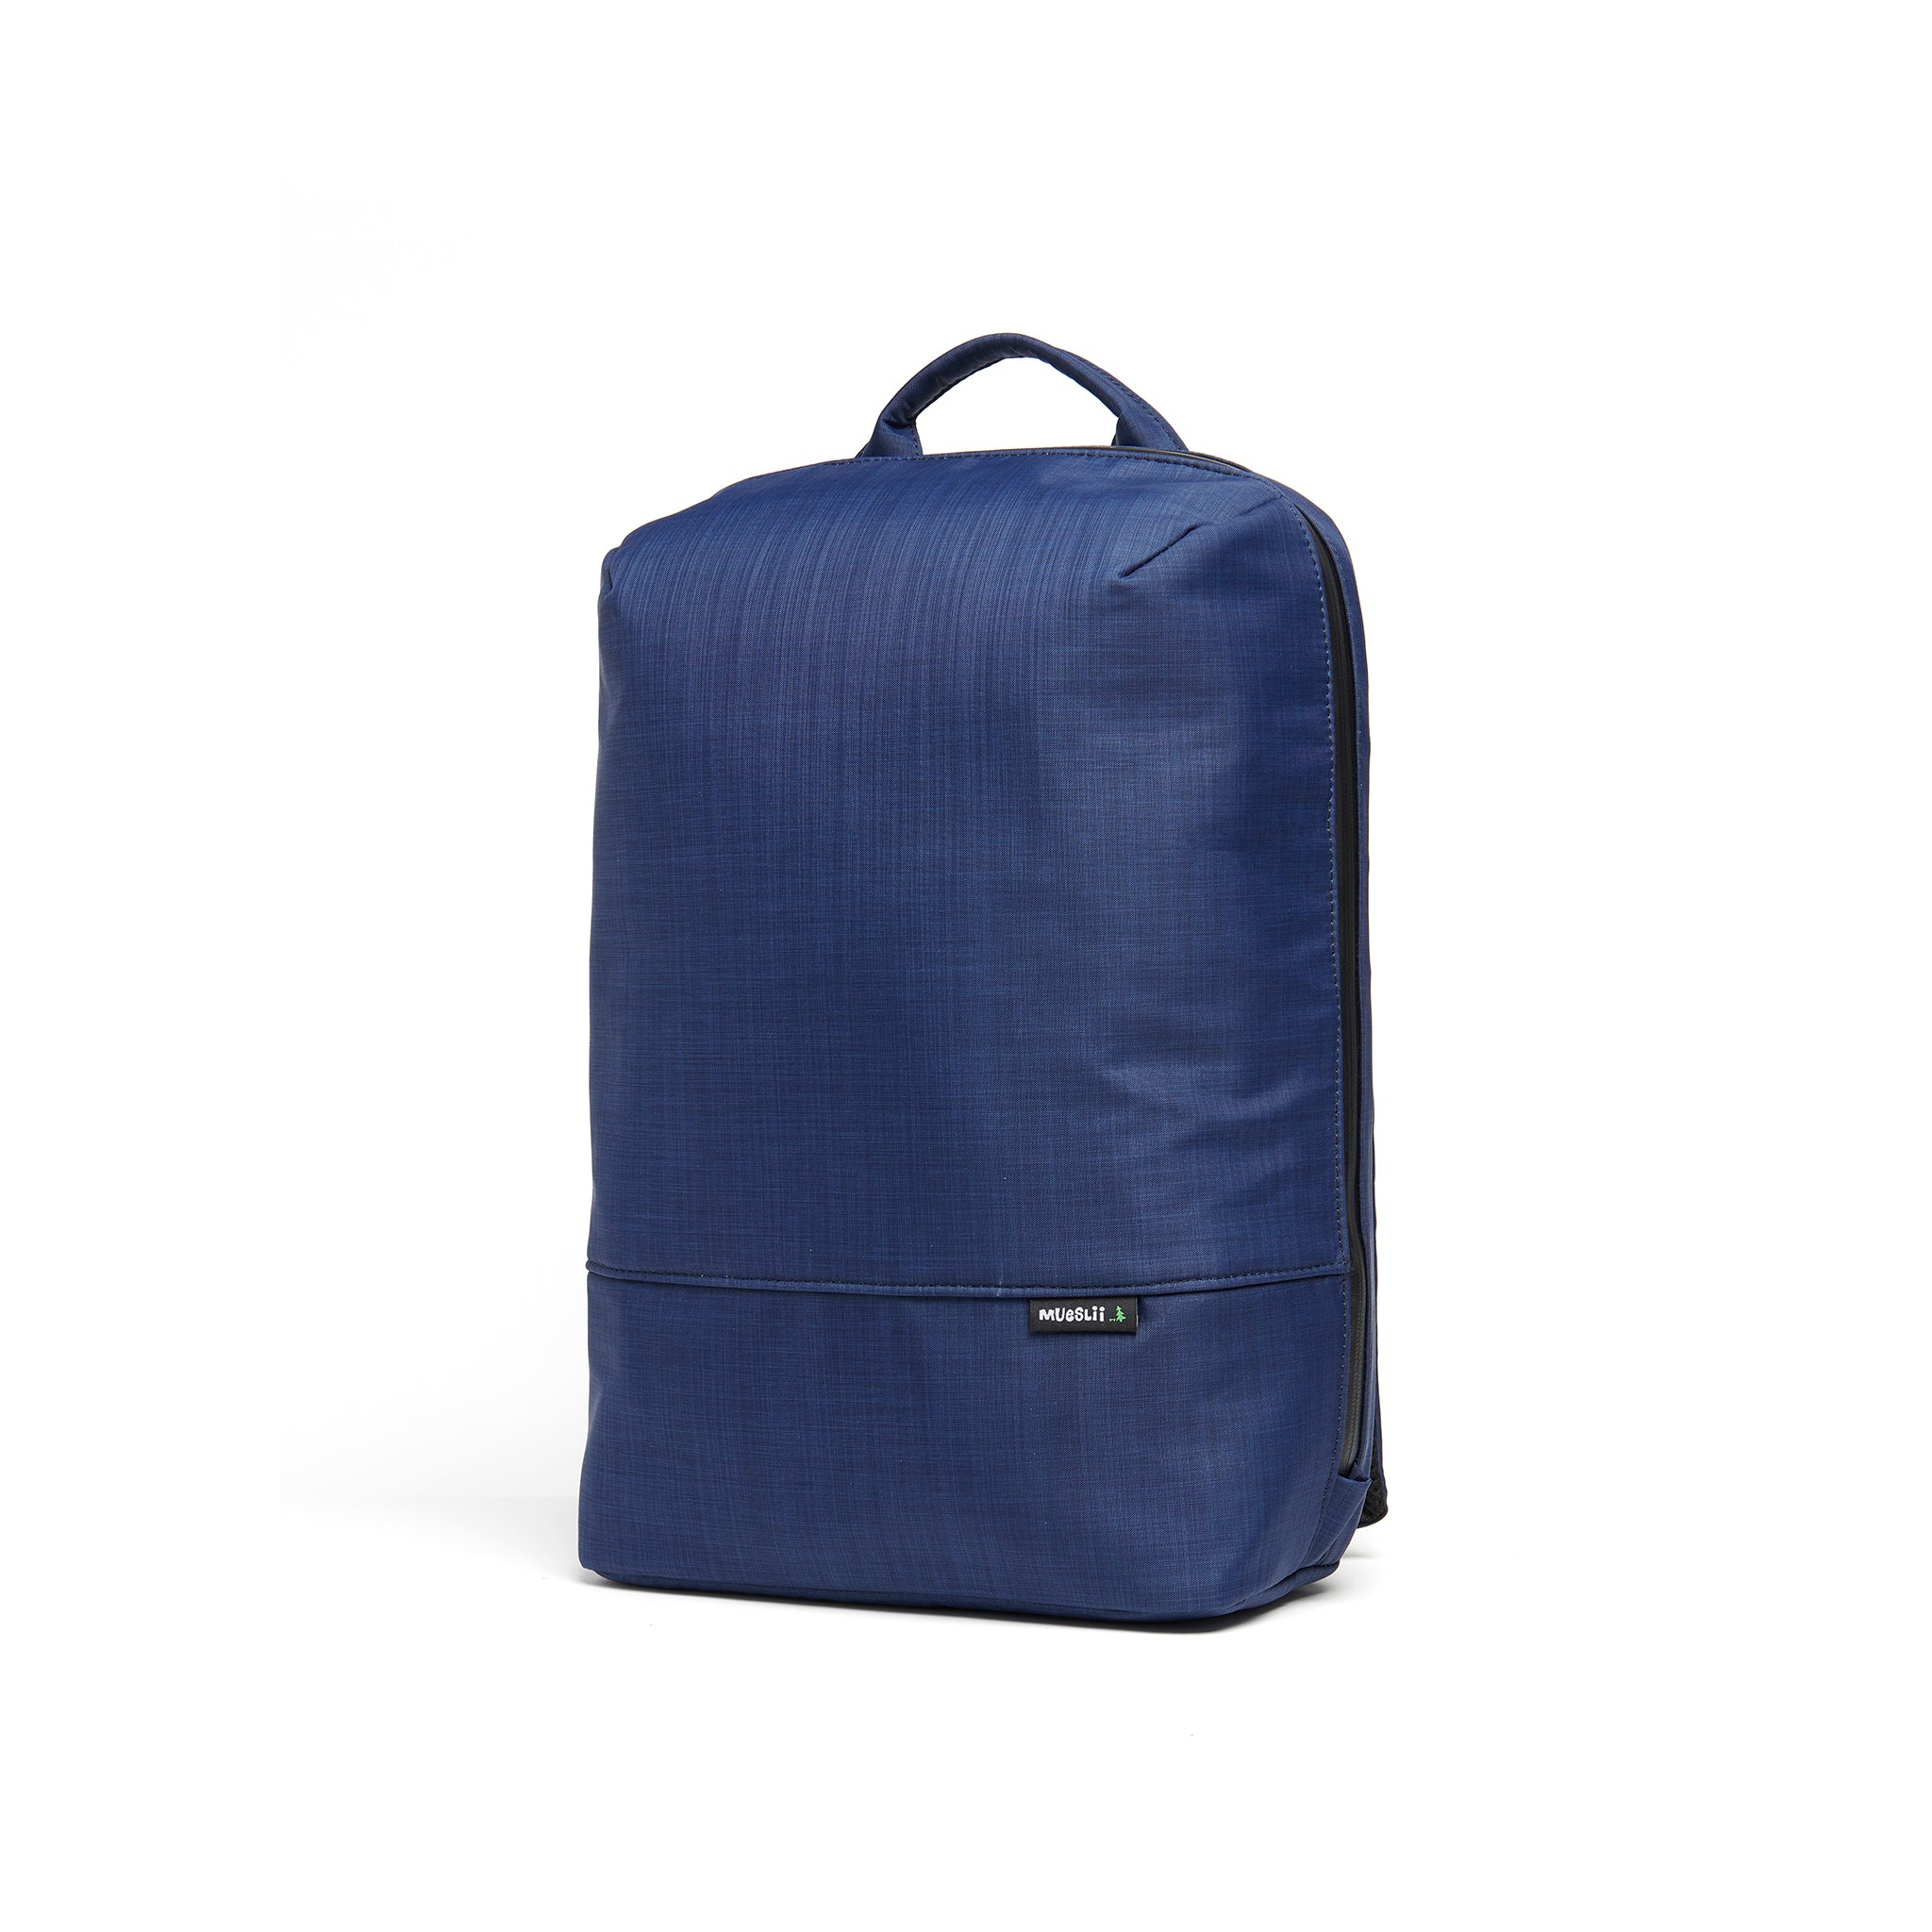 Mueslii daily backpack, made of  water resistant canvas nylon, with a laptop compartment, color ocean view, side view.